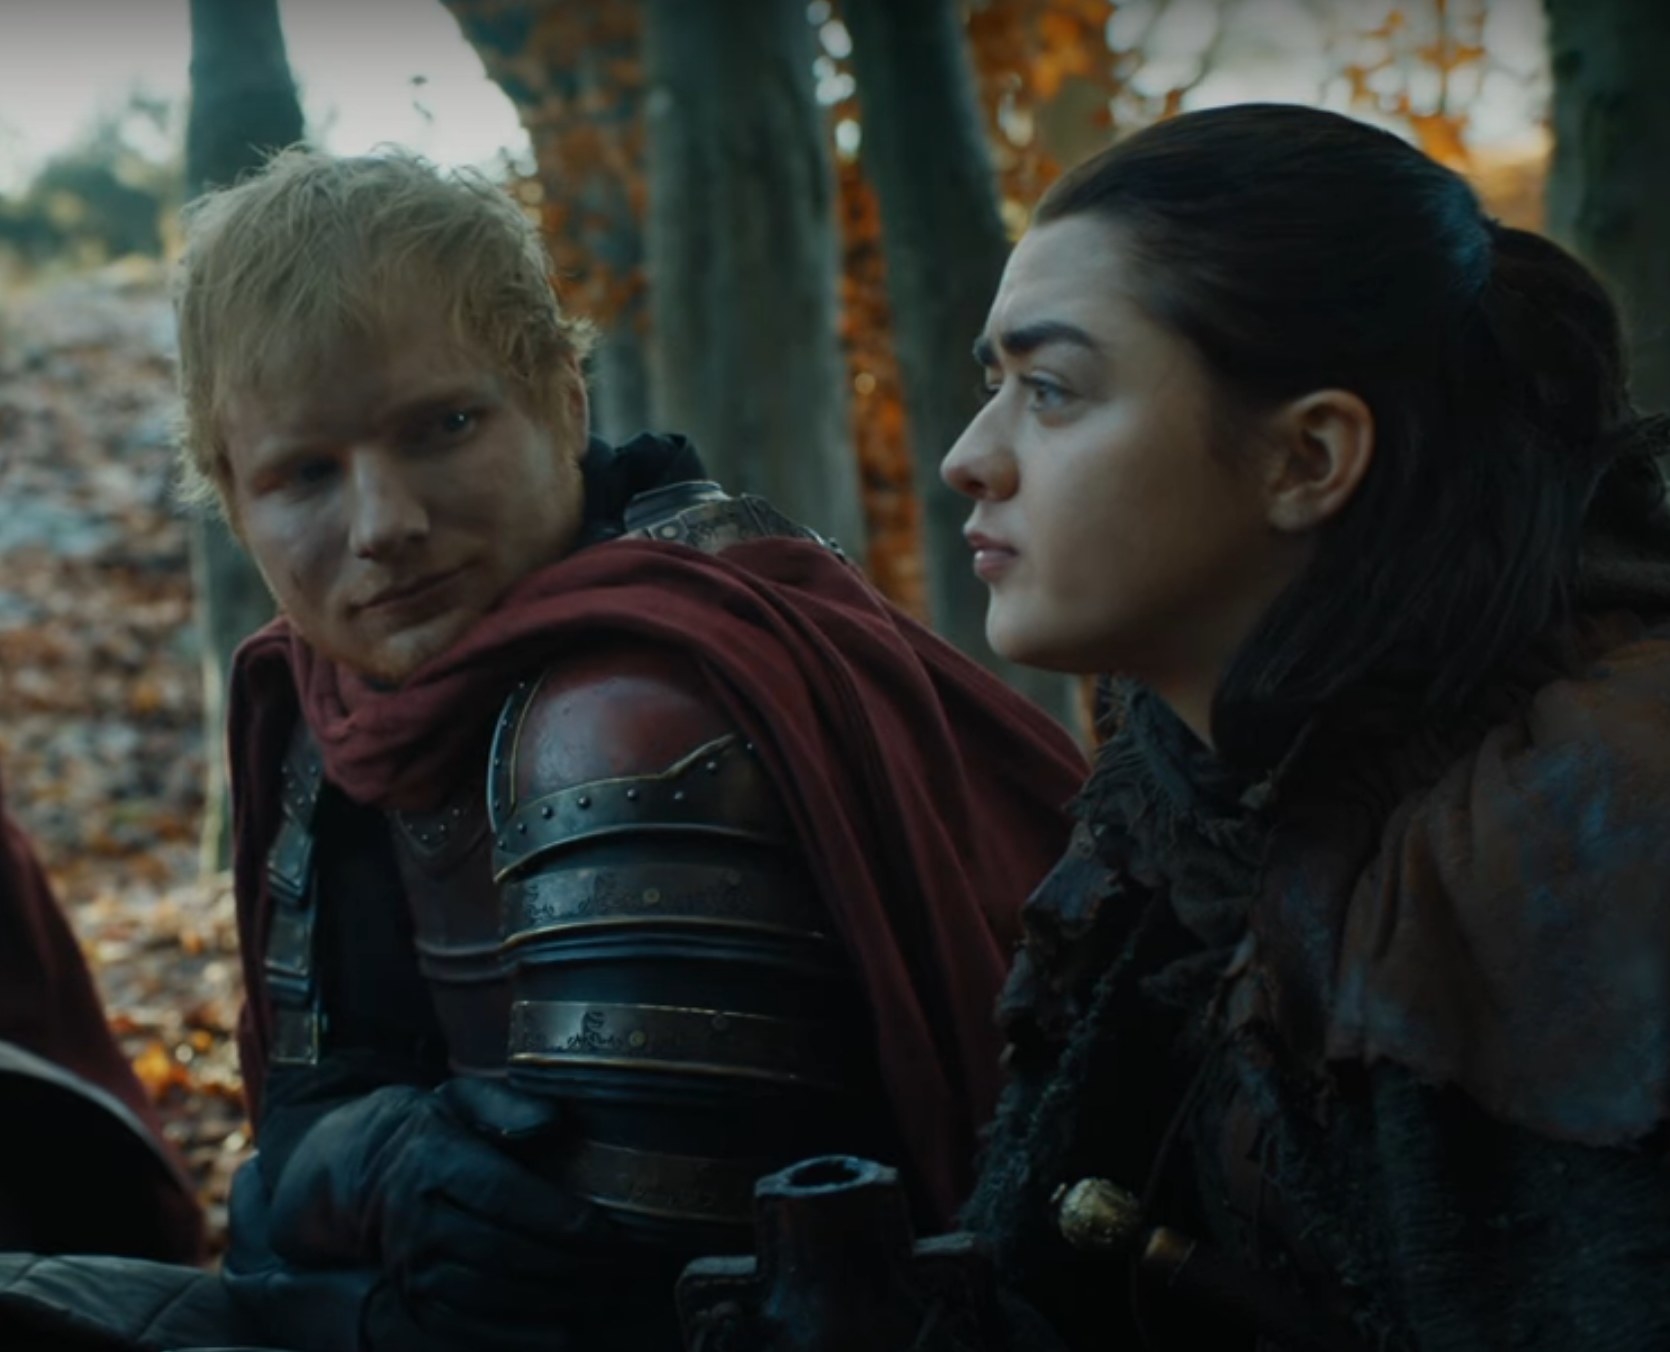 Ed Sheeran plays a soldier in &quot;Game of Thrones&quot; opposite Maisie Williams as Arya